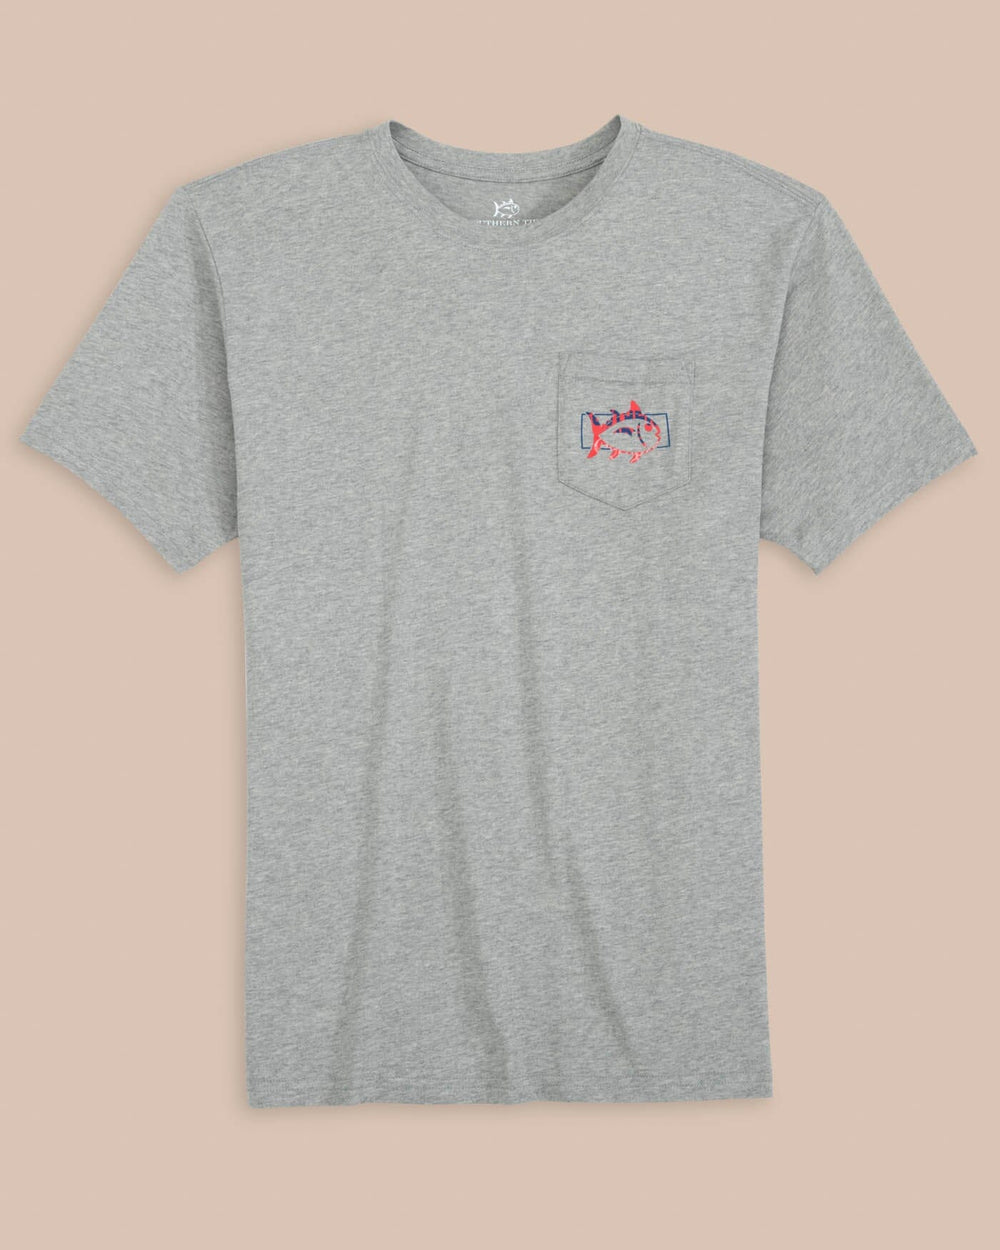 The front view of the Southern Tide Boxy Skipjack Heather Short Sleeve T-Shirt by Southern Tide - Heather Grey